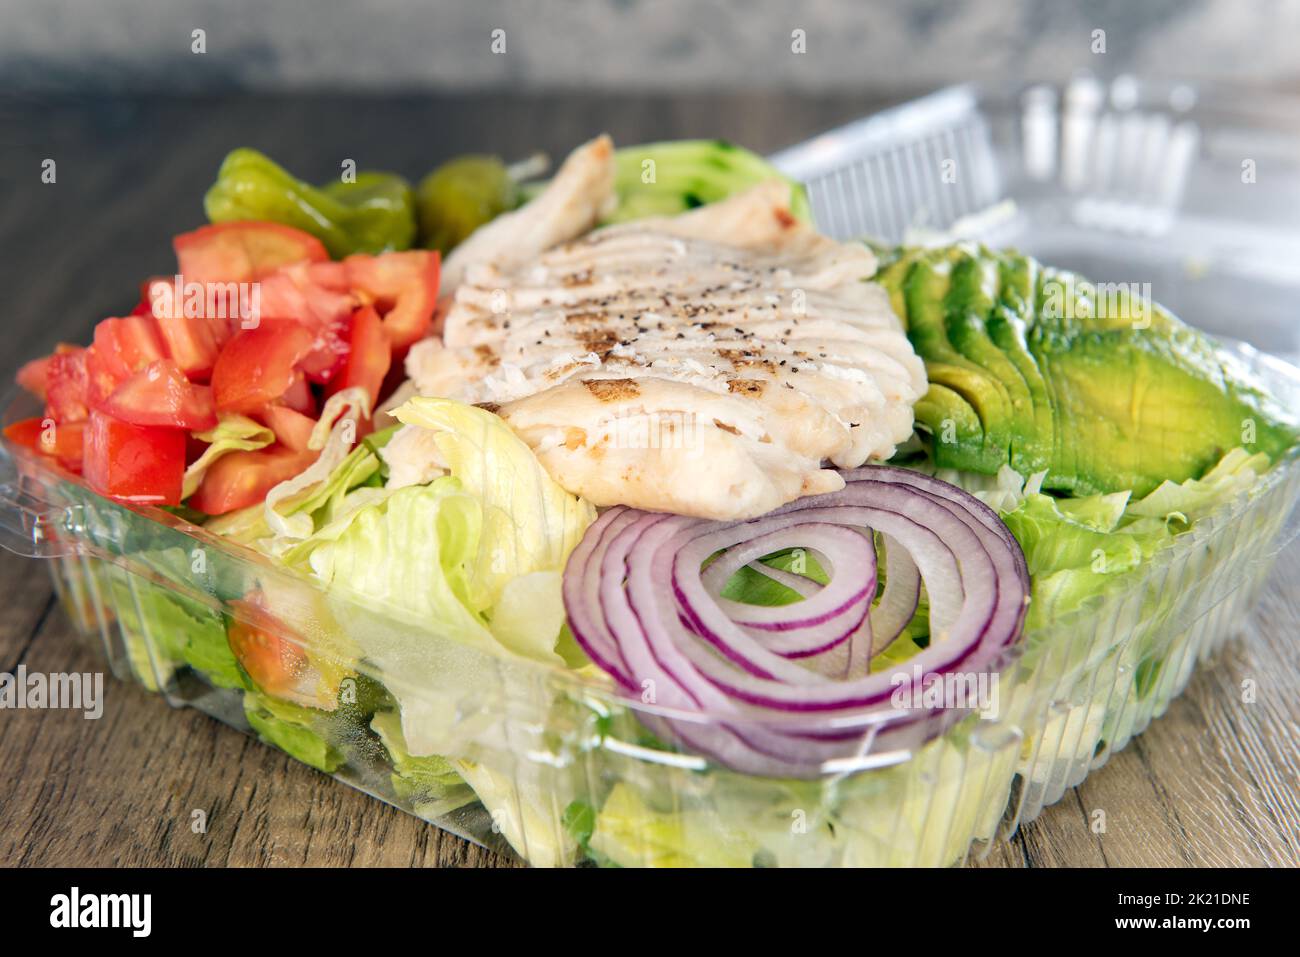 Lunch is served with a loaded grilled chicken breast salad overflowing with ingredients and sliced avocado. Stock Photo